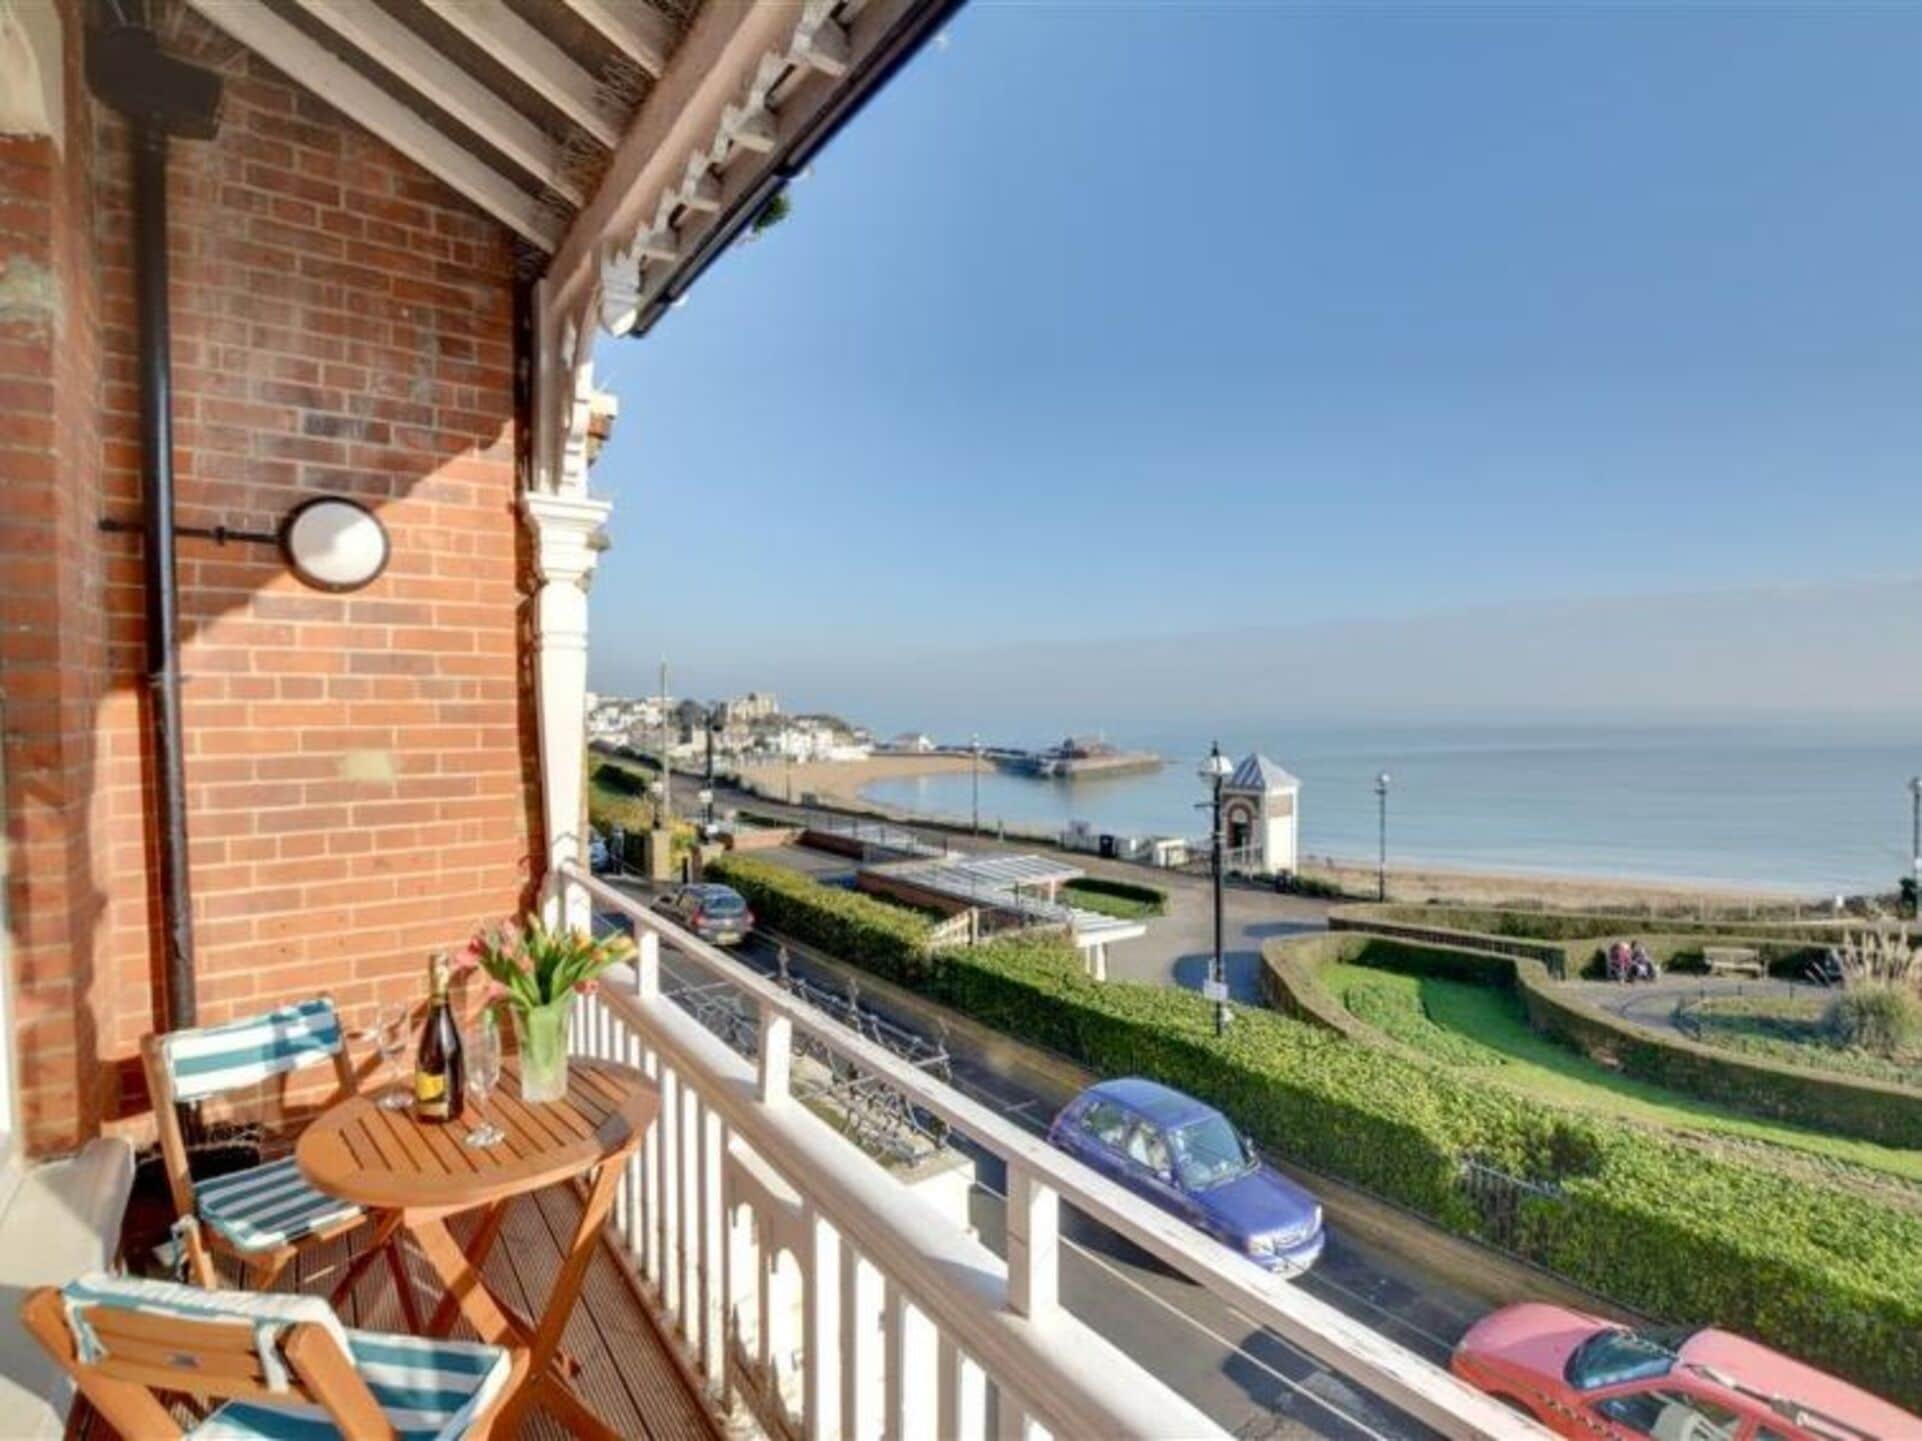 Property Image 1 - Property Manager Villa with First Class Amenities, England Villa 1054